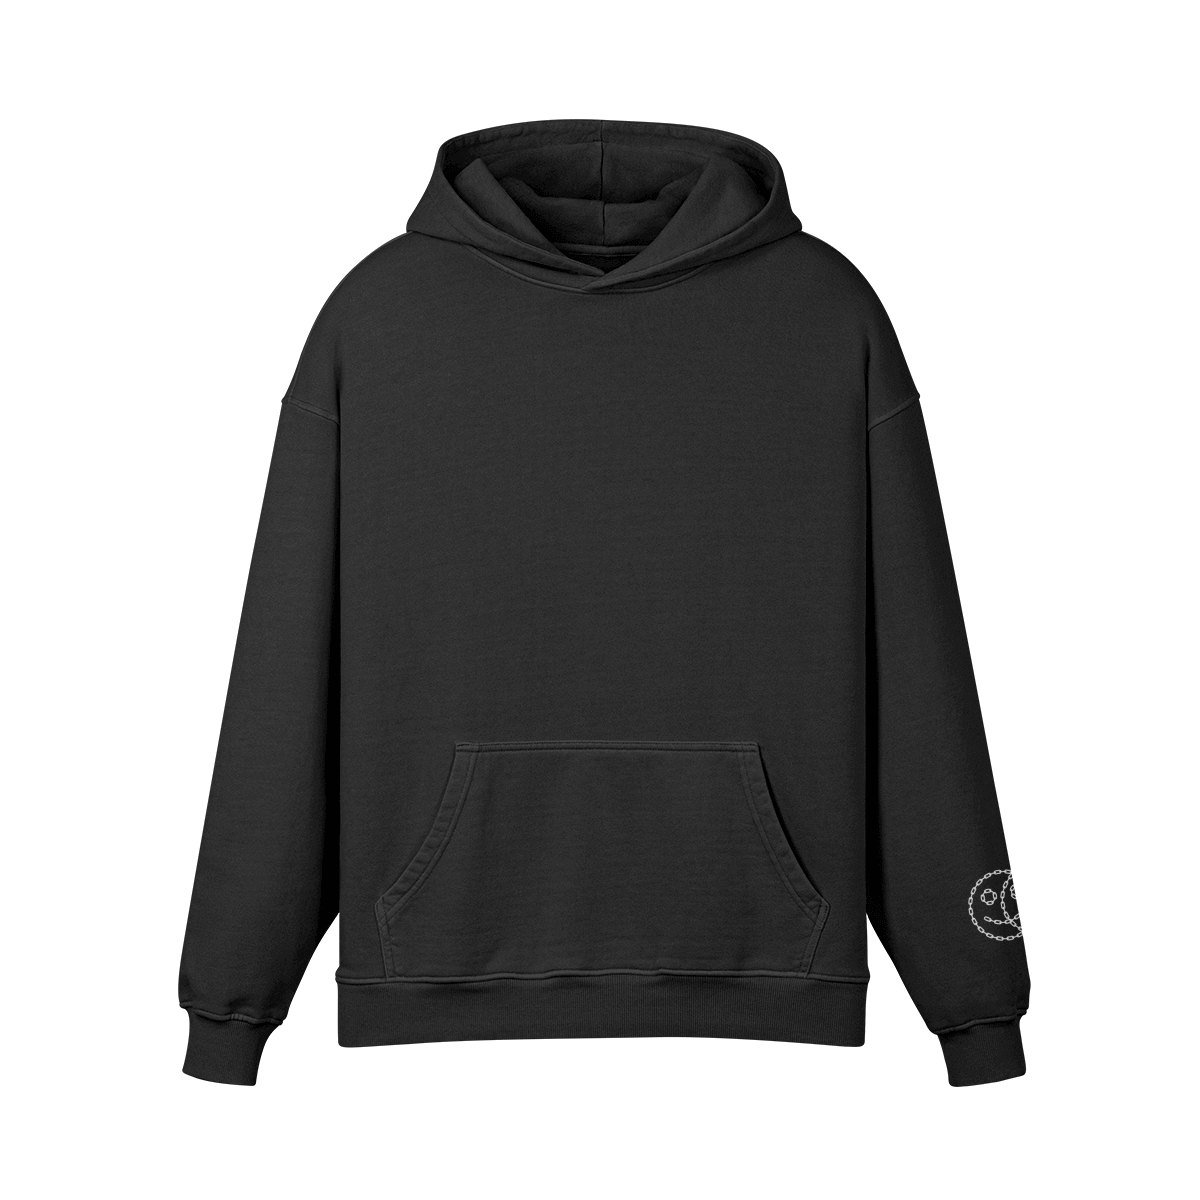 Insane Frown Posse Oversized Hoodie